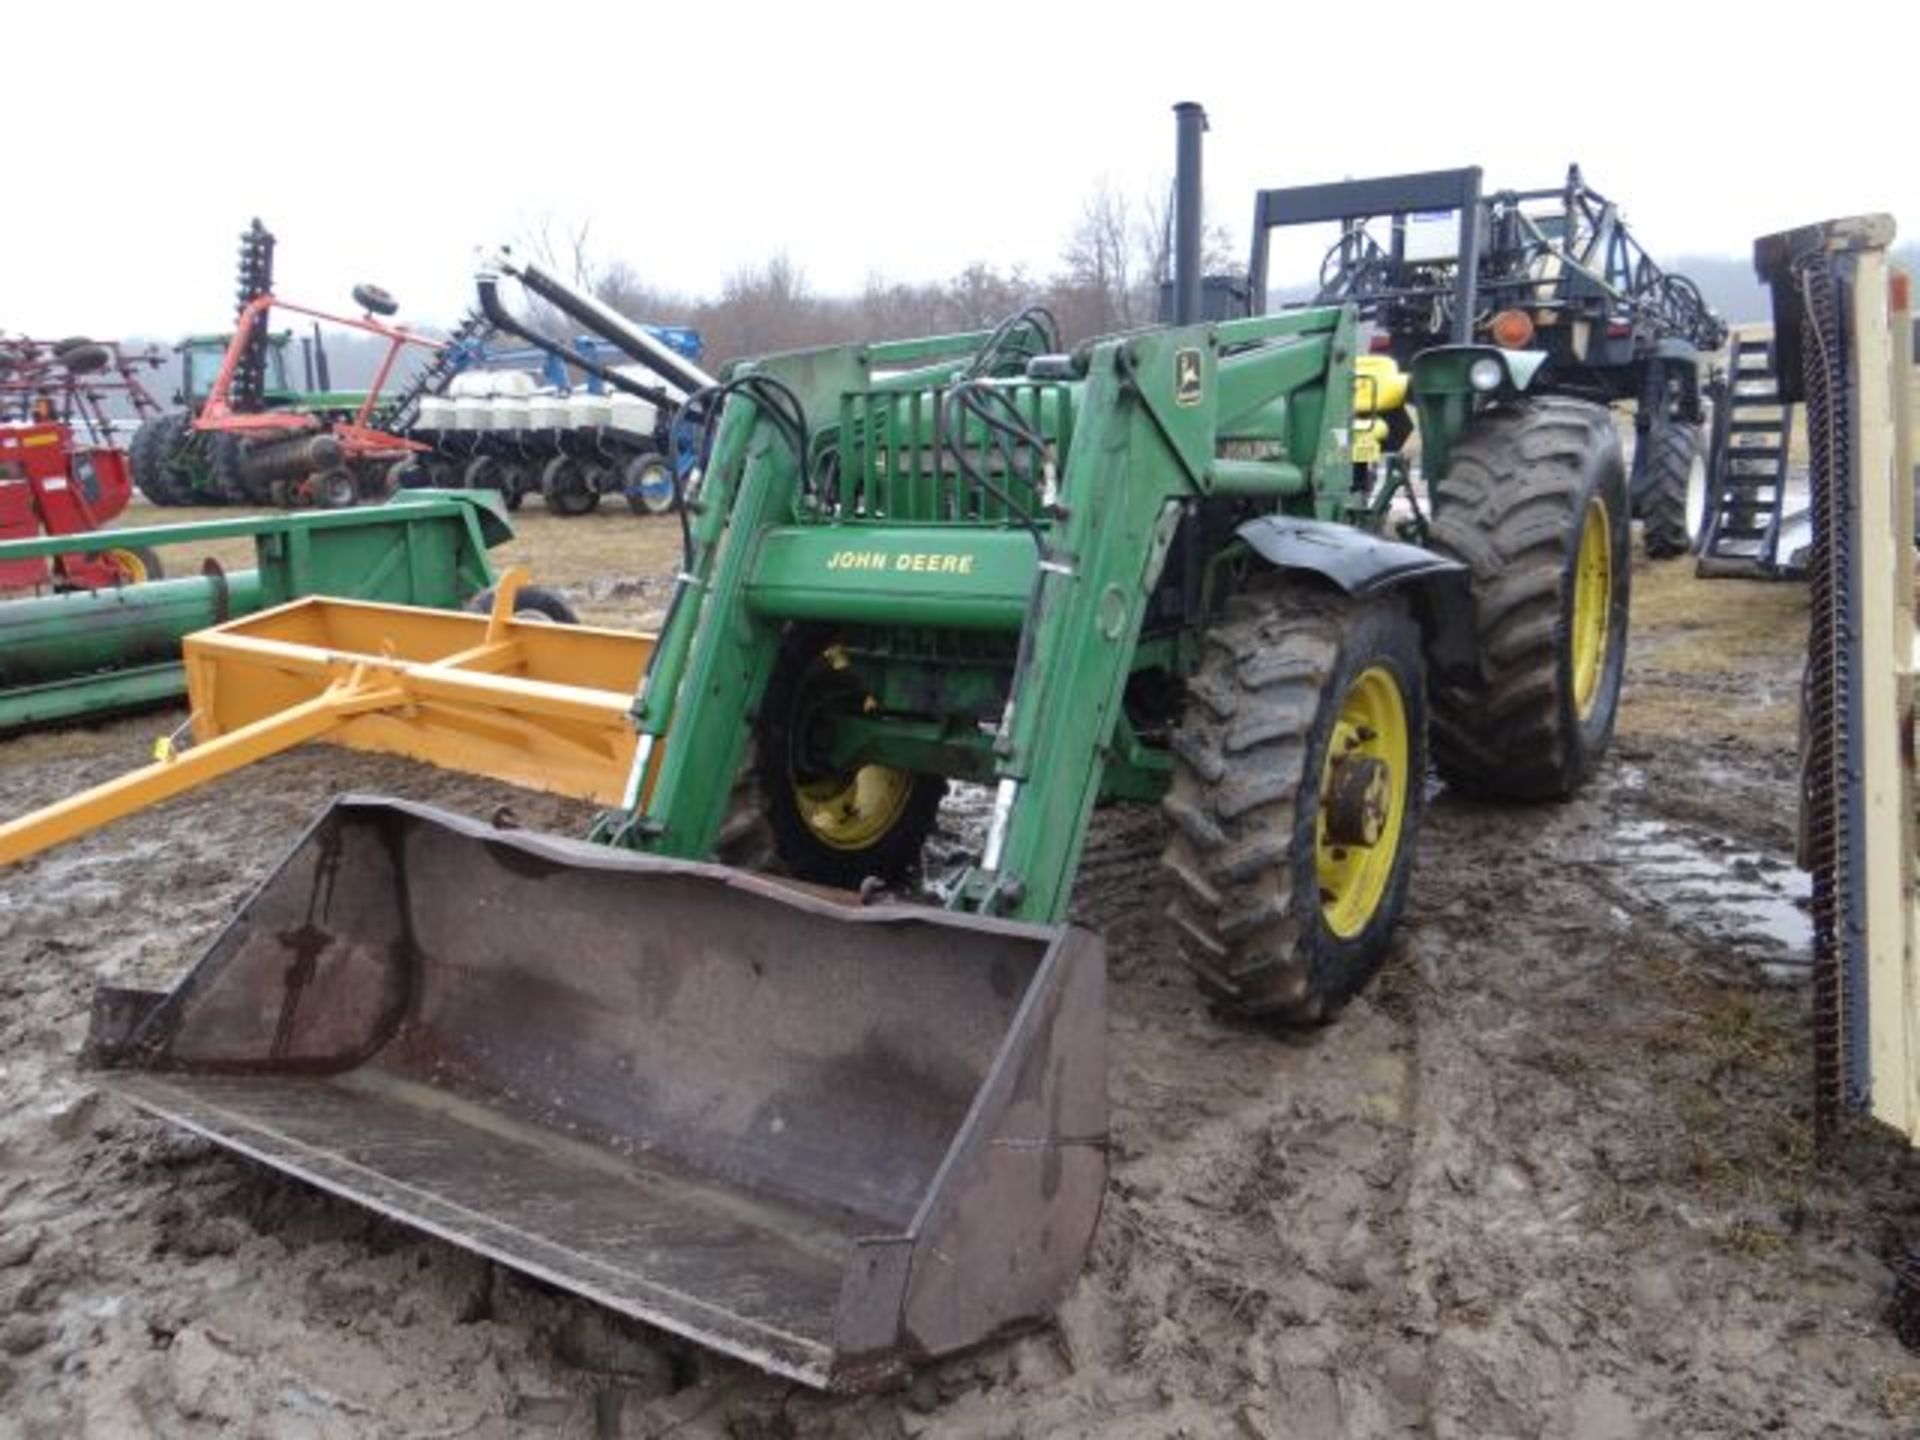 JD 2555 Tractor, 1987 #112611, 7562 hrs, 8sp TSS, Cast Wheels, Flanged Axle, 540 PTO, 1 SCV, w/JD